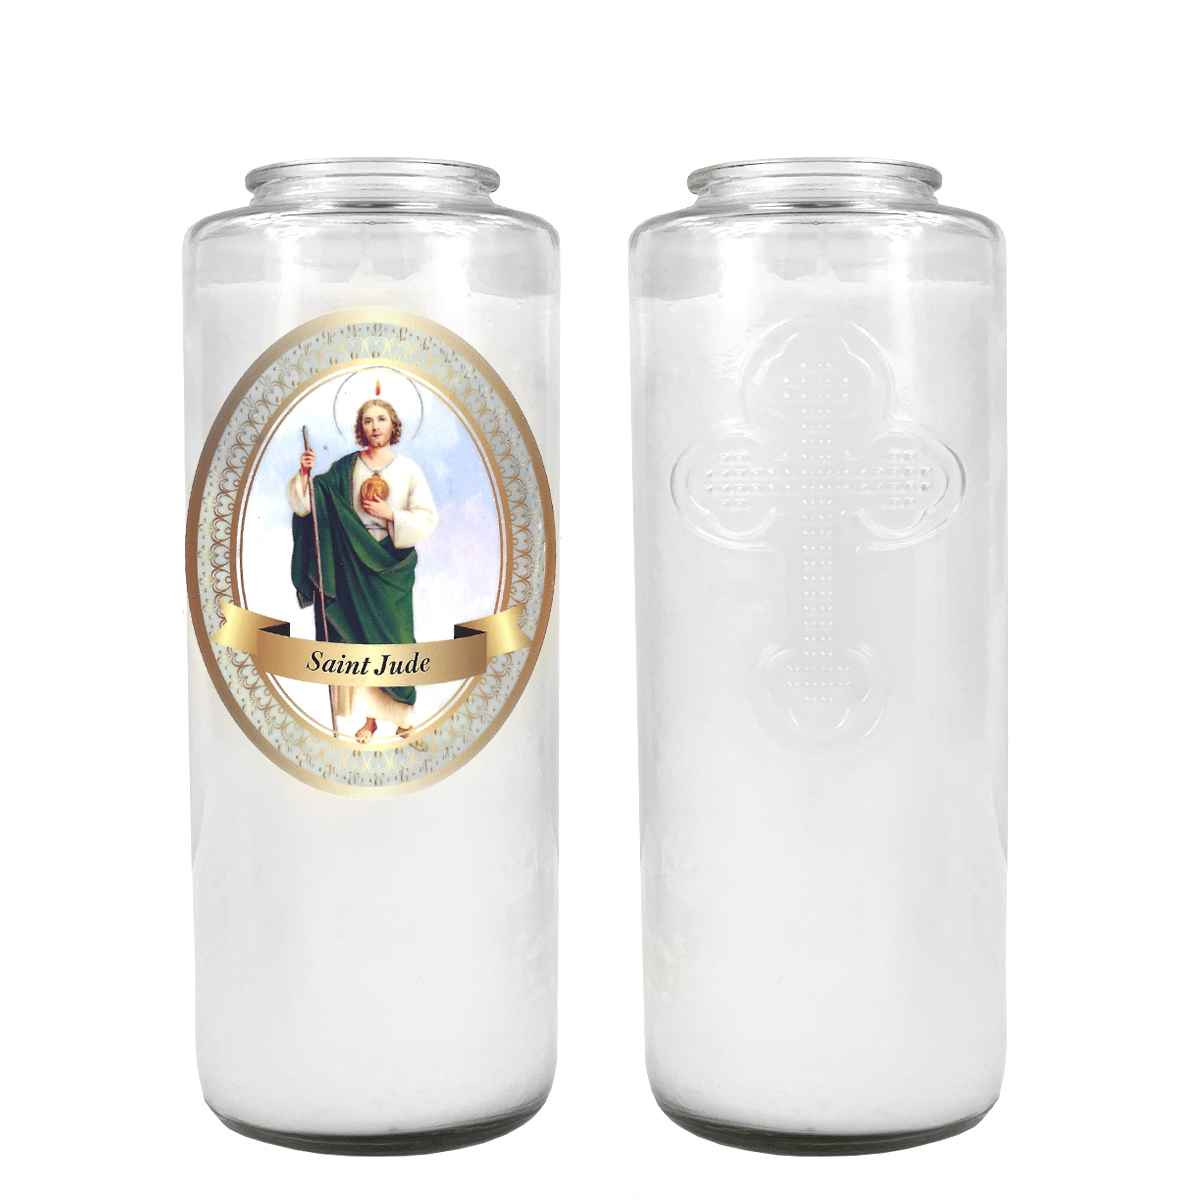 SAINT JUDE 5 DAY CANDLE W/ REMOVABLE LABEL